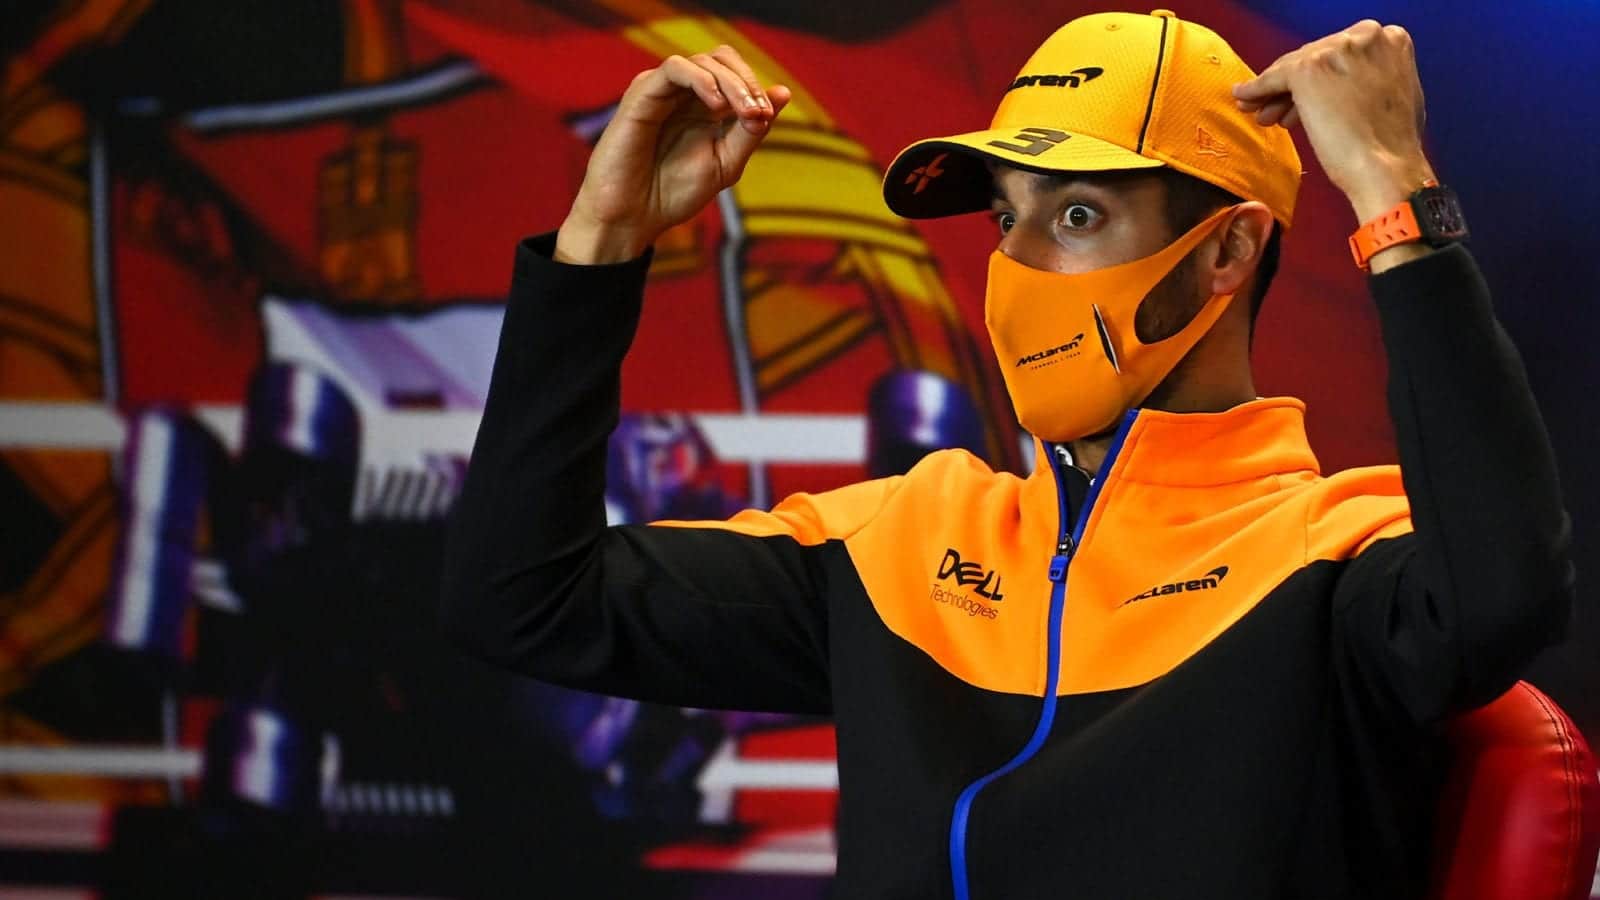 PORTIMAO, PORTUGAL - APRIL 29: Daniel Ricciardo of Australia and McLaren F1 talks in the Drivers Press Conference during previews ahead of the F1 Grand Prix of Portugal at Autodromo Internacional Do Algarve on April 29, 2021 in Portimao, Portugal. (Photo by Gabriel Bouys - Pool/Getty Images)